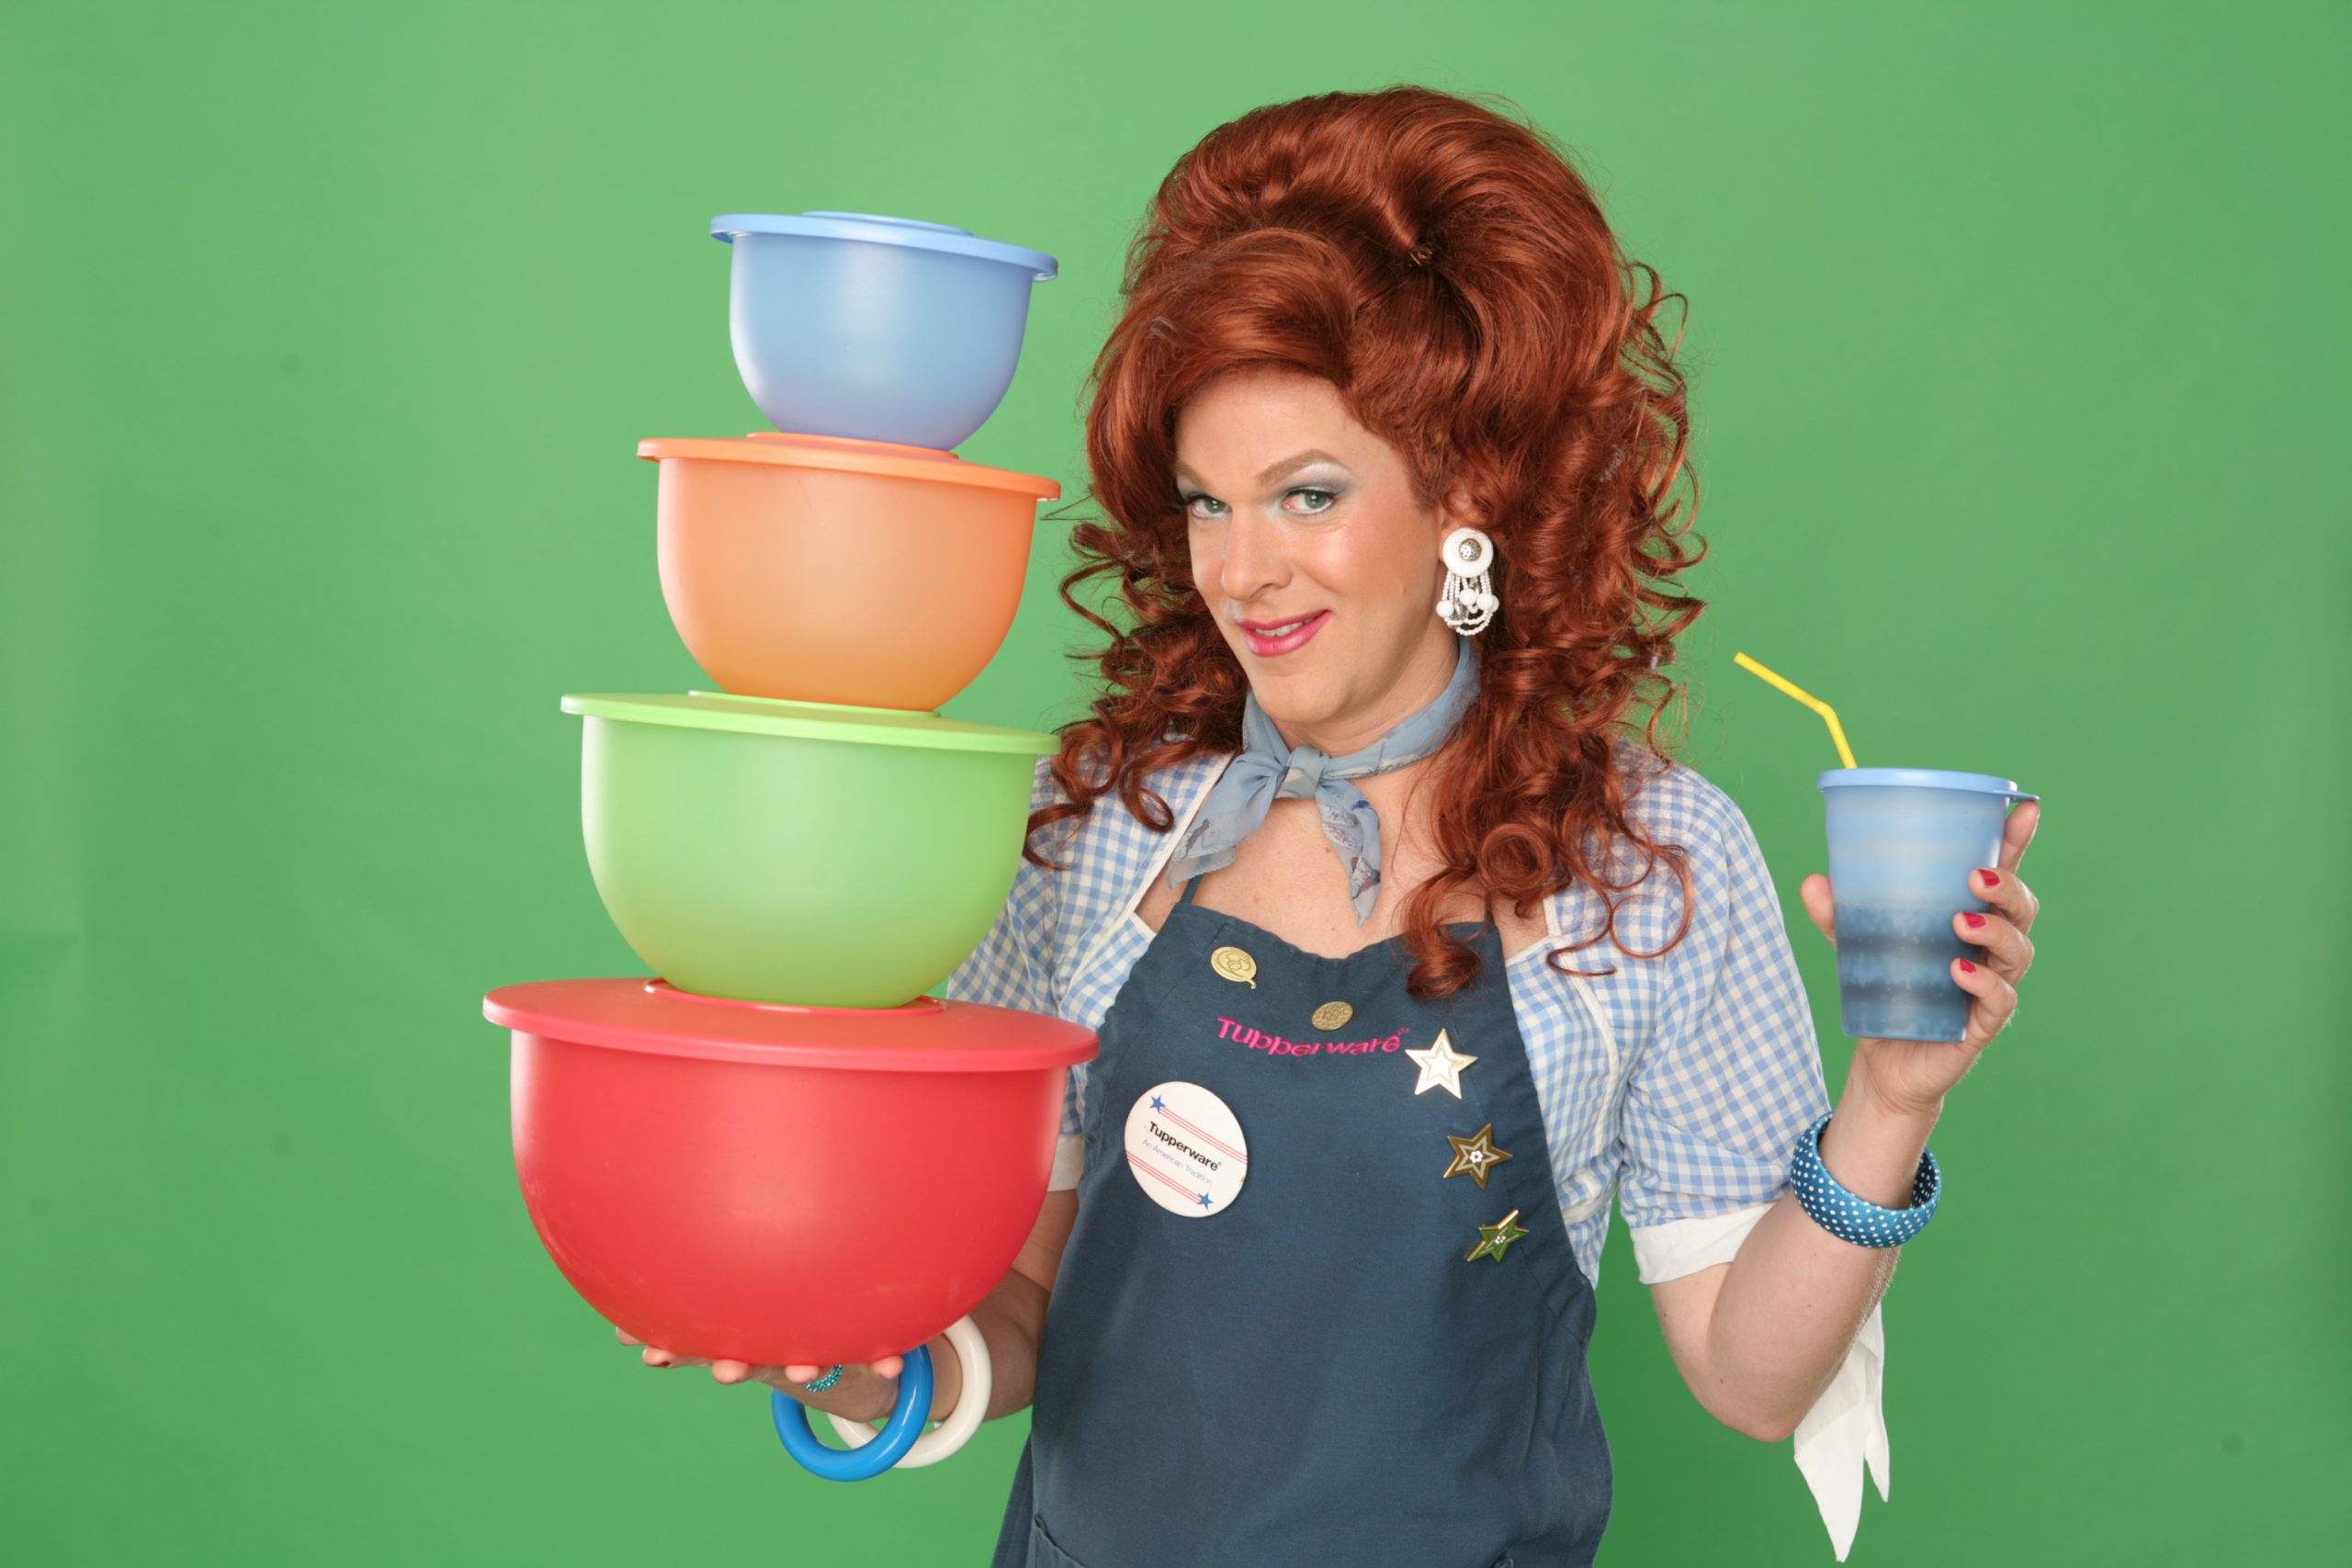 Dixie's Tupperware Party - Dixie holding Tupperware bowls